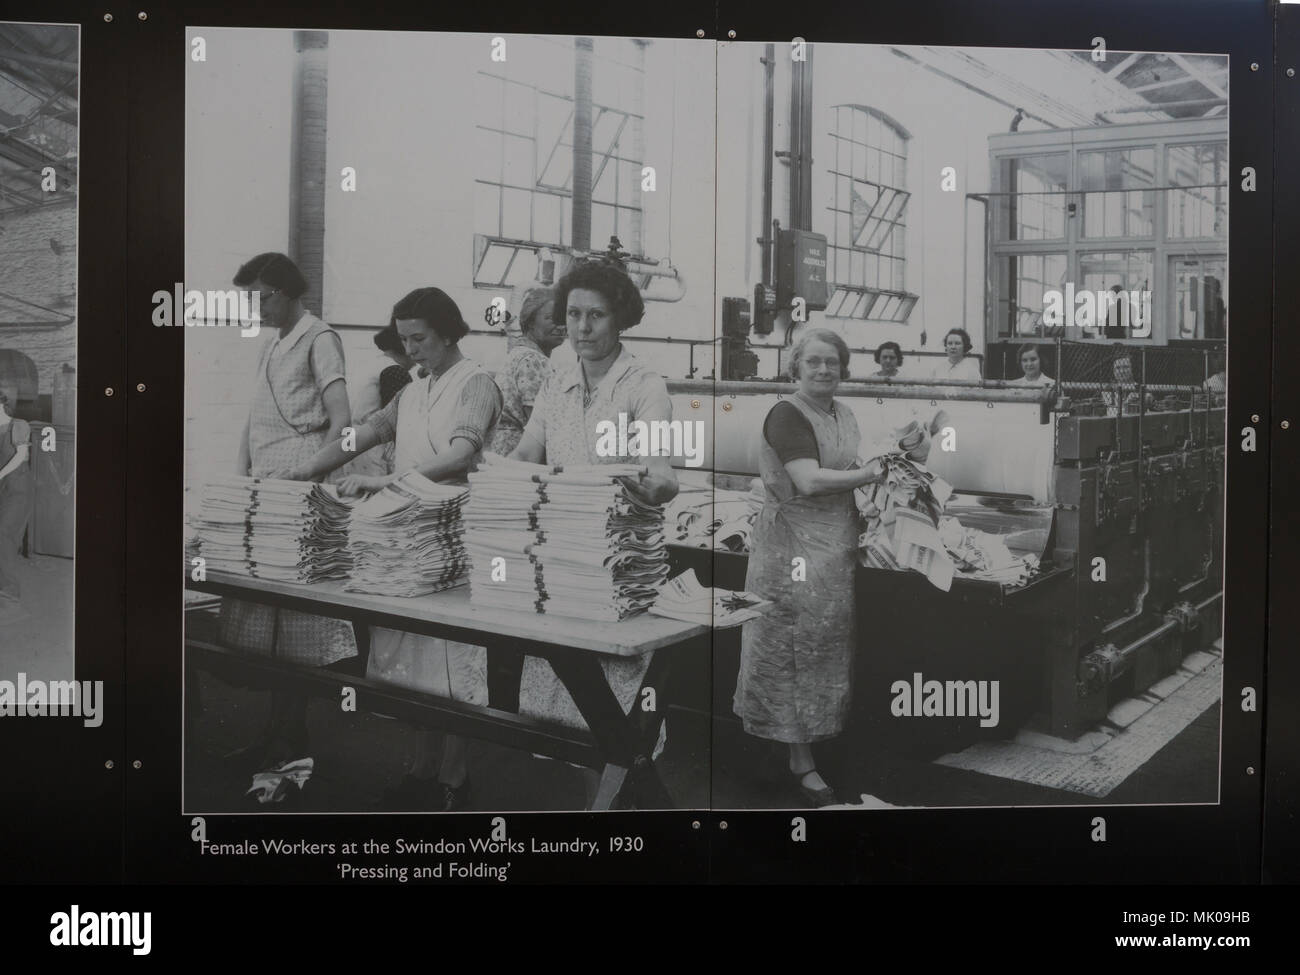 Public display of old historic images about the GWR works, Swindon, Wiltshire, England, UK female workers at works laundry 1930 Stock Photo